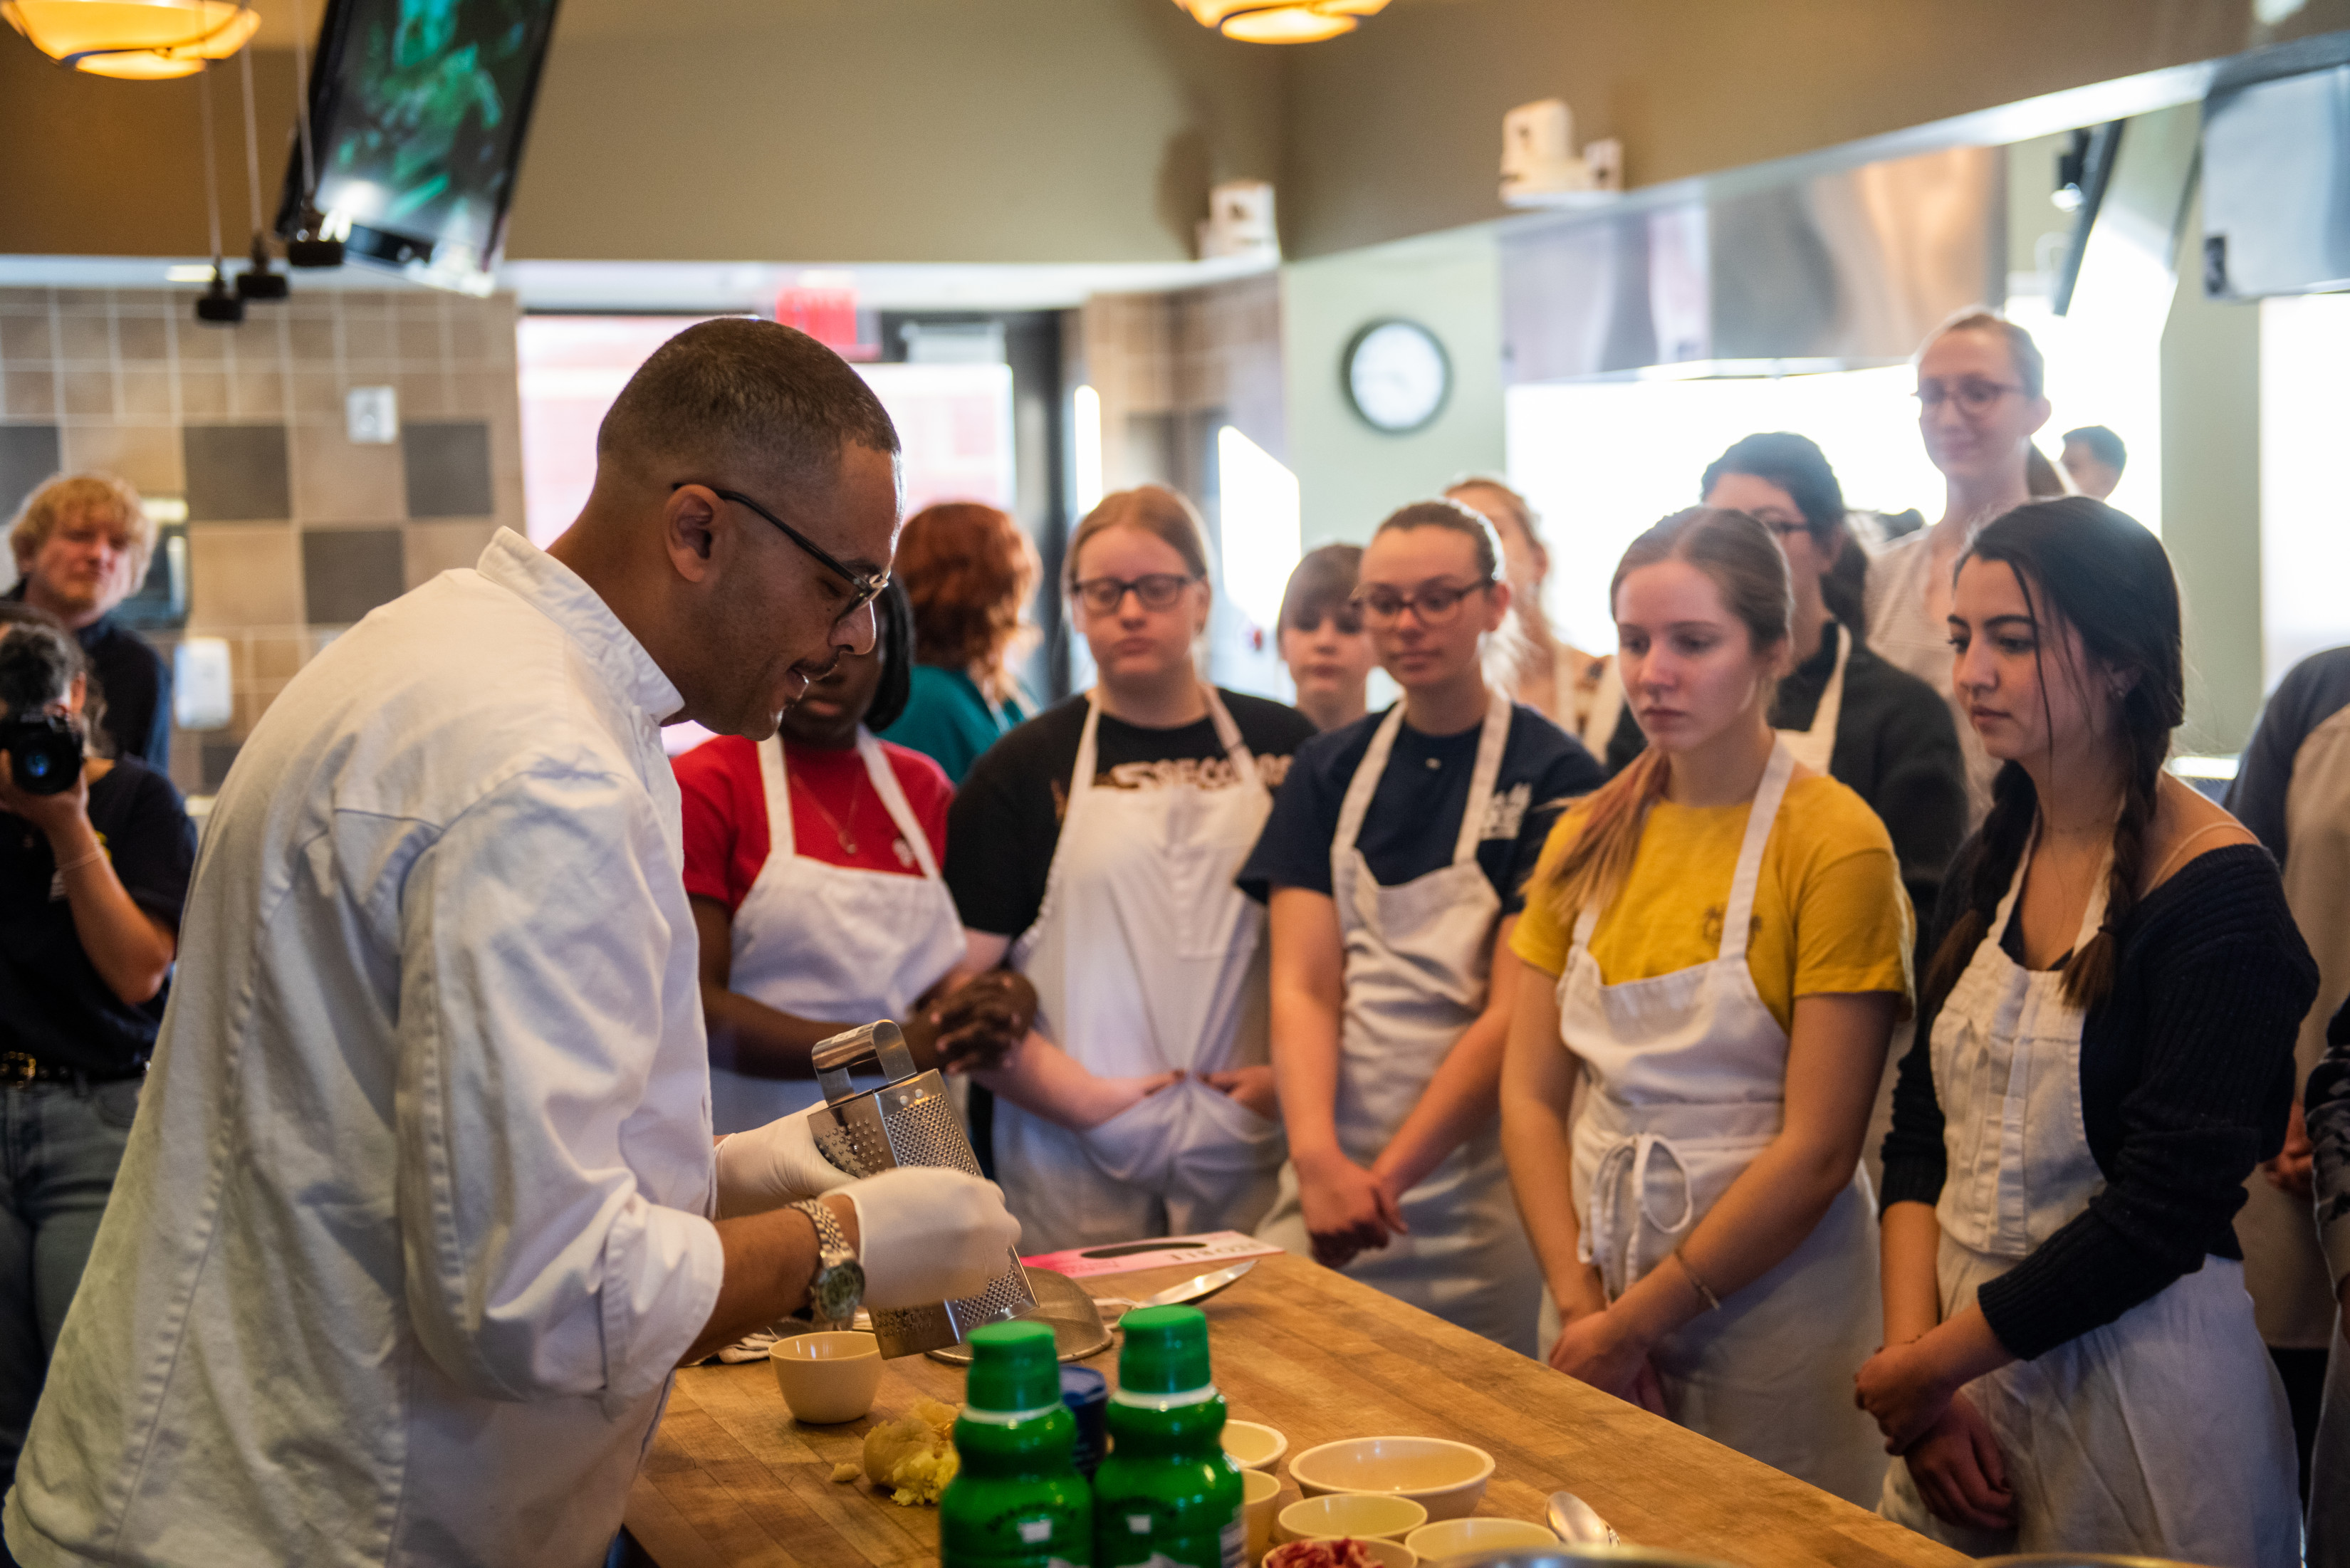 Guest chef demonstrating cooking techniques to group of students in School of Hotel and Restaurant Management kitchens.